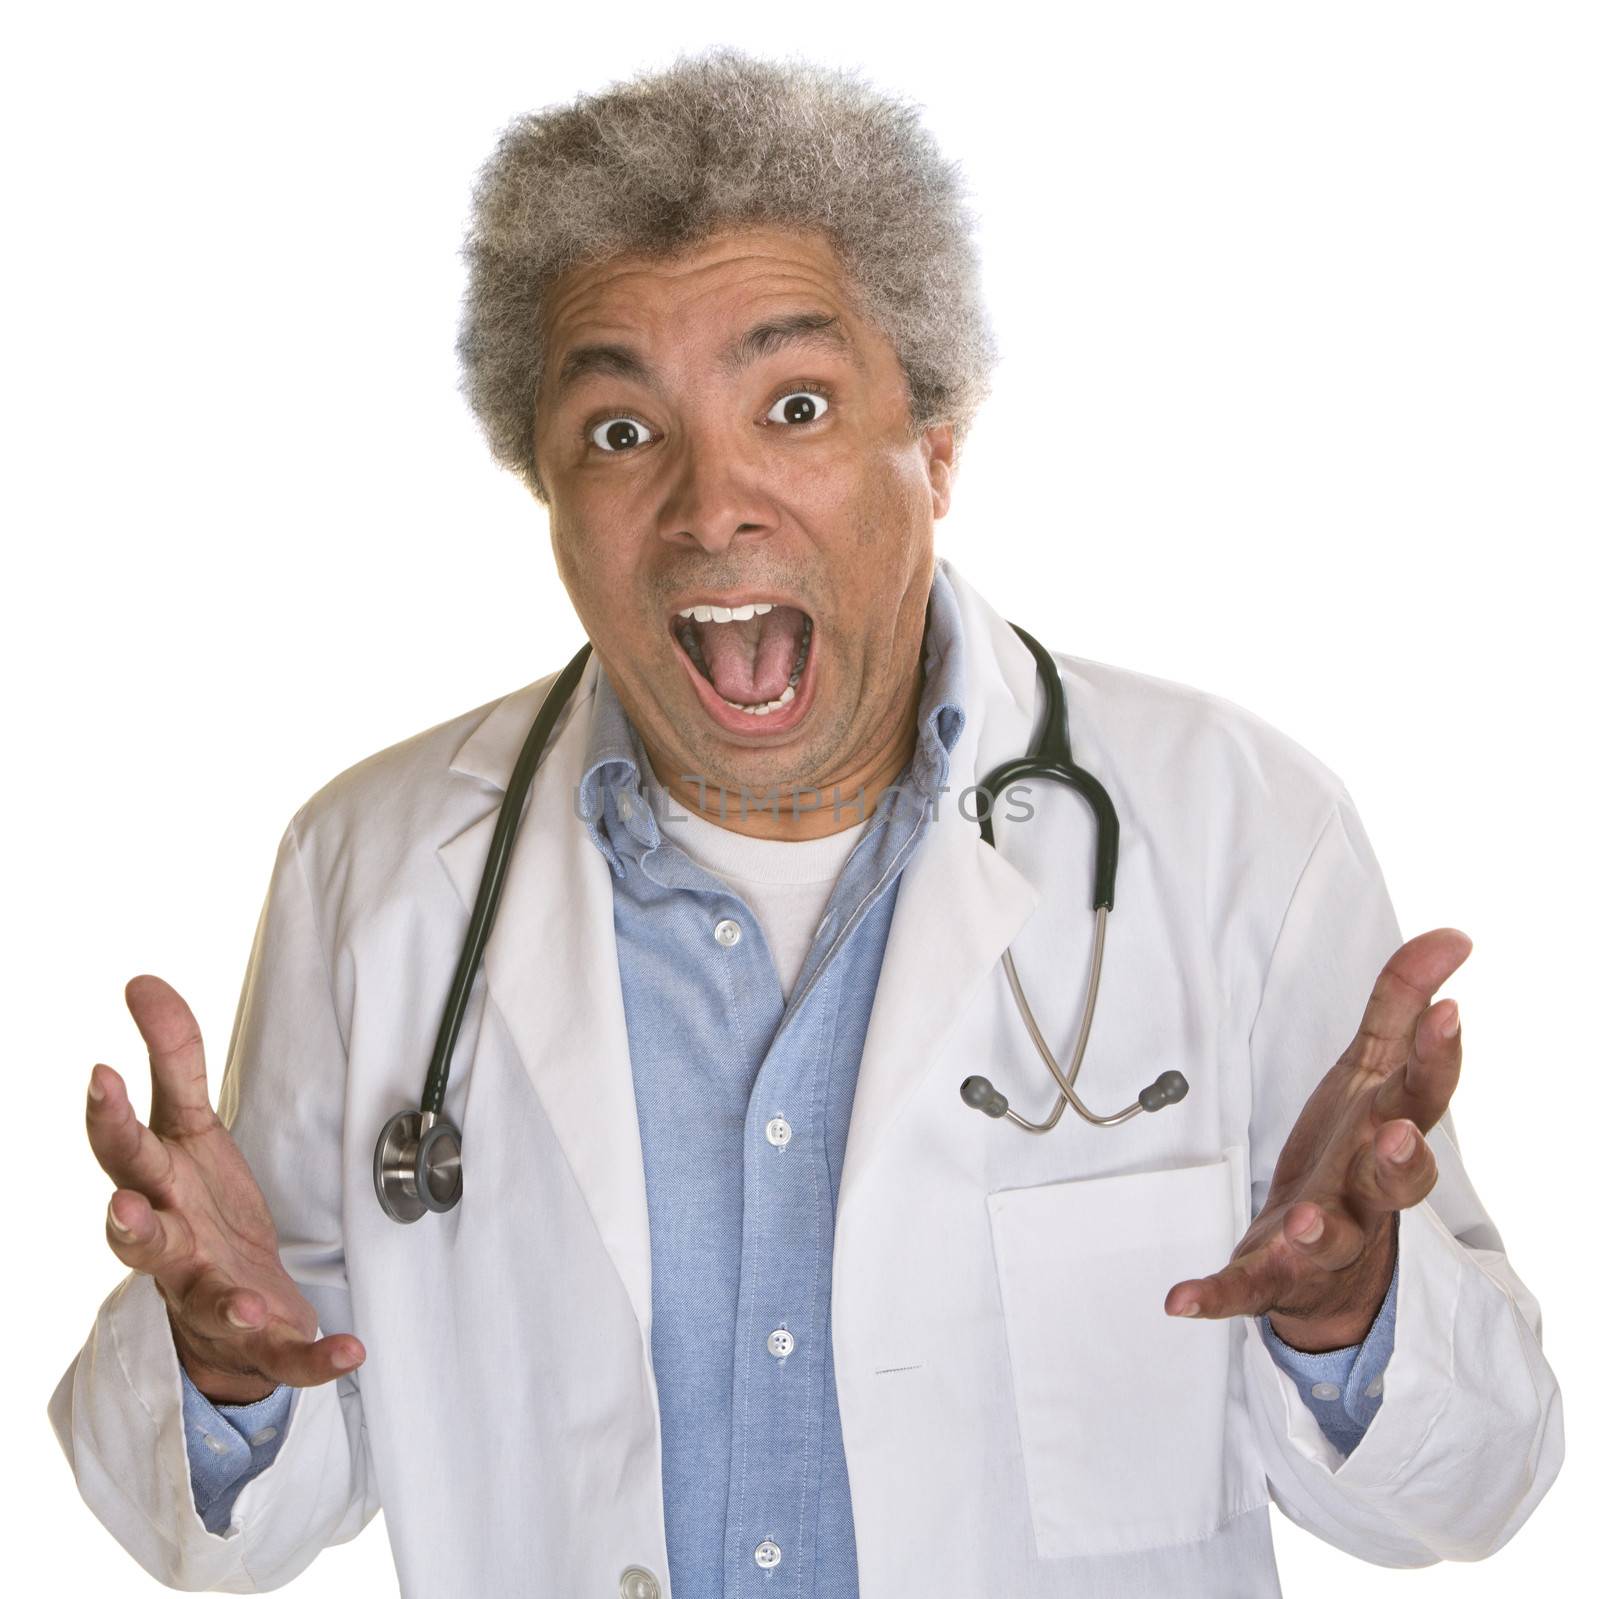 Screaming medical doctor with hands out on white background